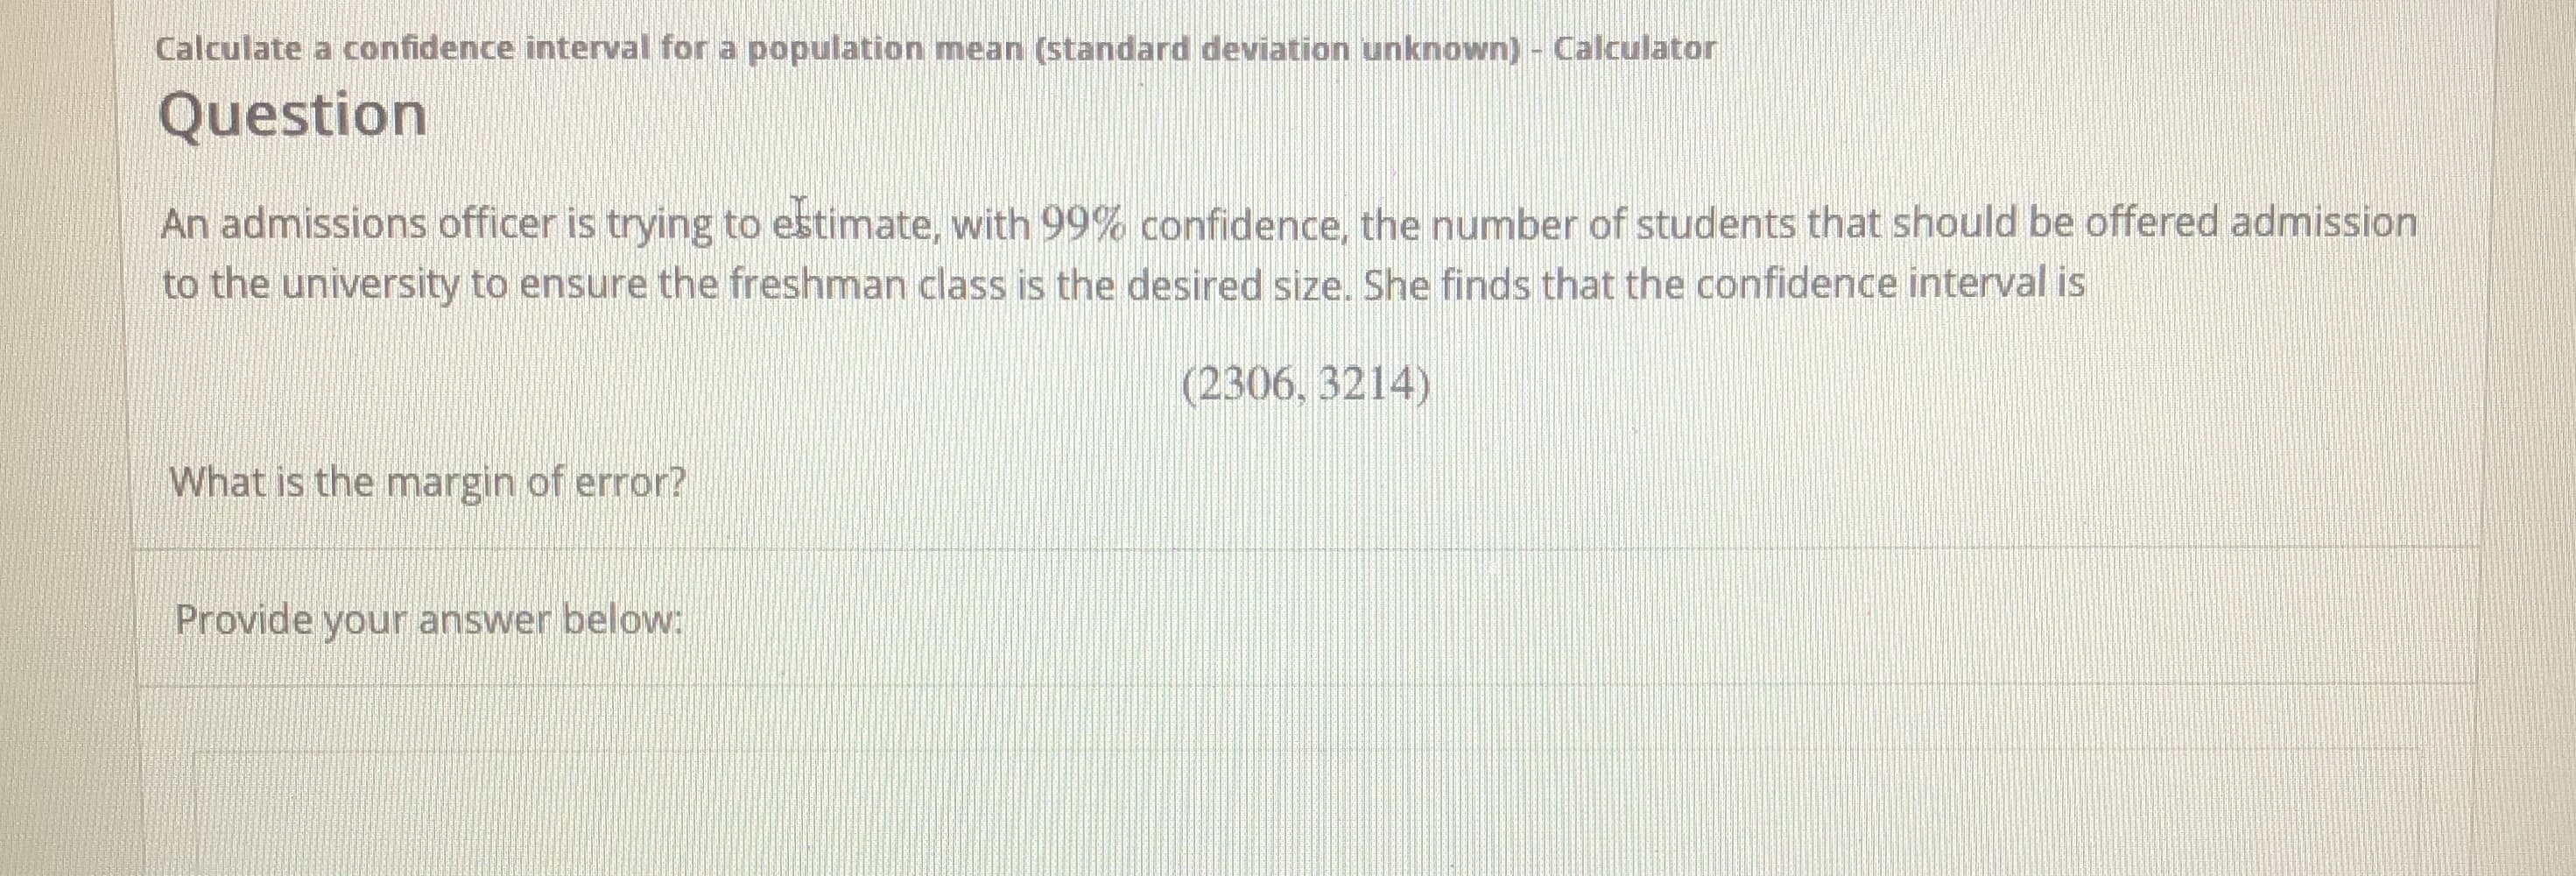 An admissions officer is trying to estimate, with 99% confidence, the number of students that should be offered admission
to the university to ensure the freshman class is the desired size. She finds that the confidence interval is
(2306, 3214)
What is the margin of error?
Provide your answer below:
